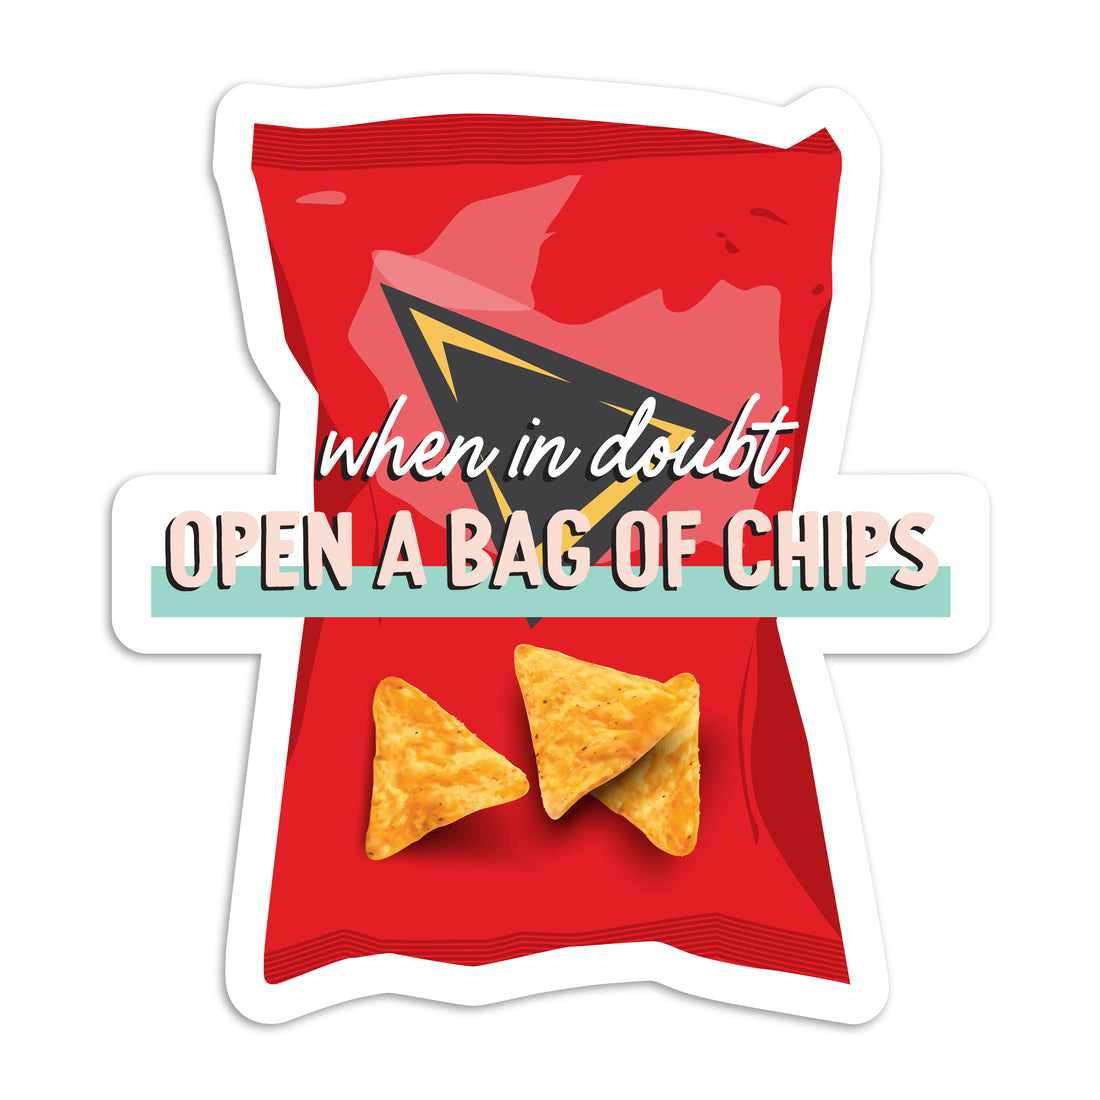 When in doubt open a bag of chips vinyl sticker by I&